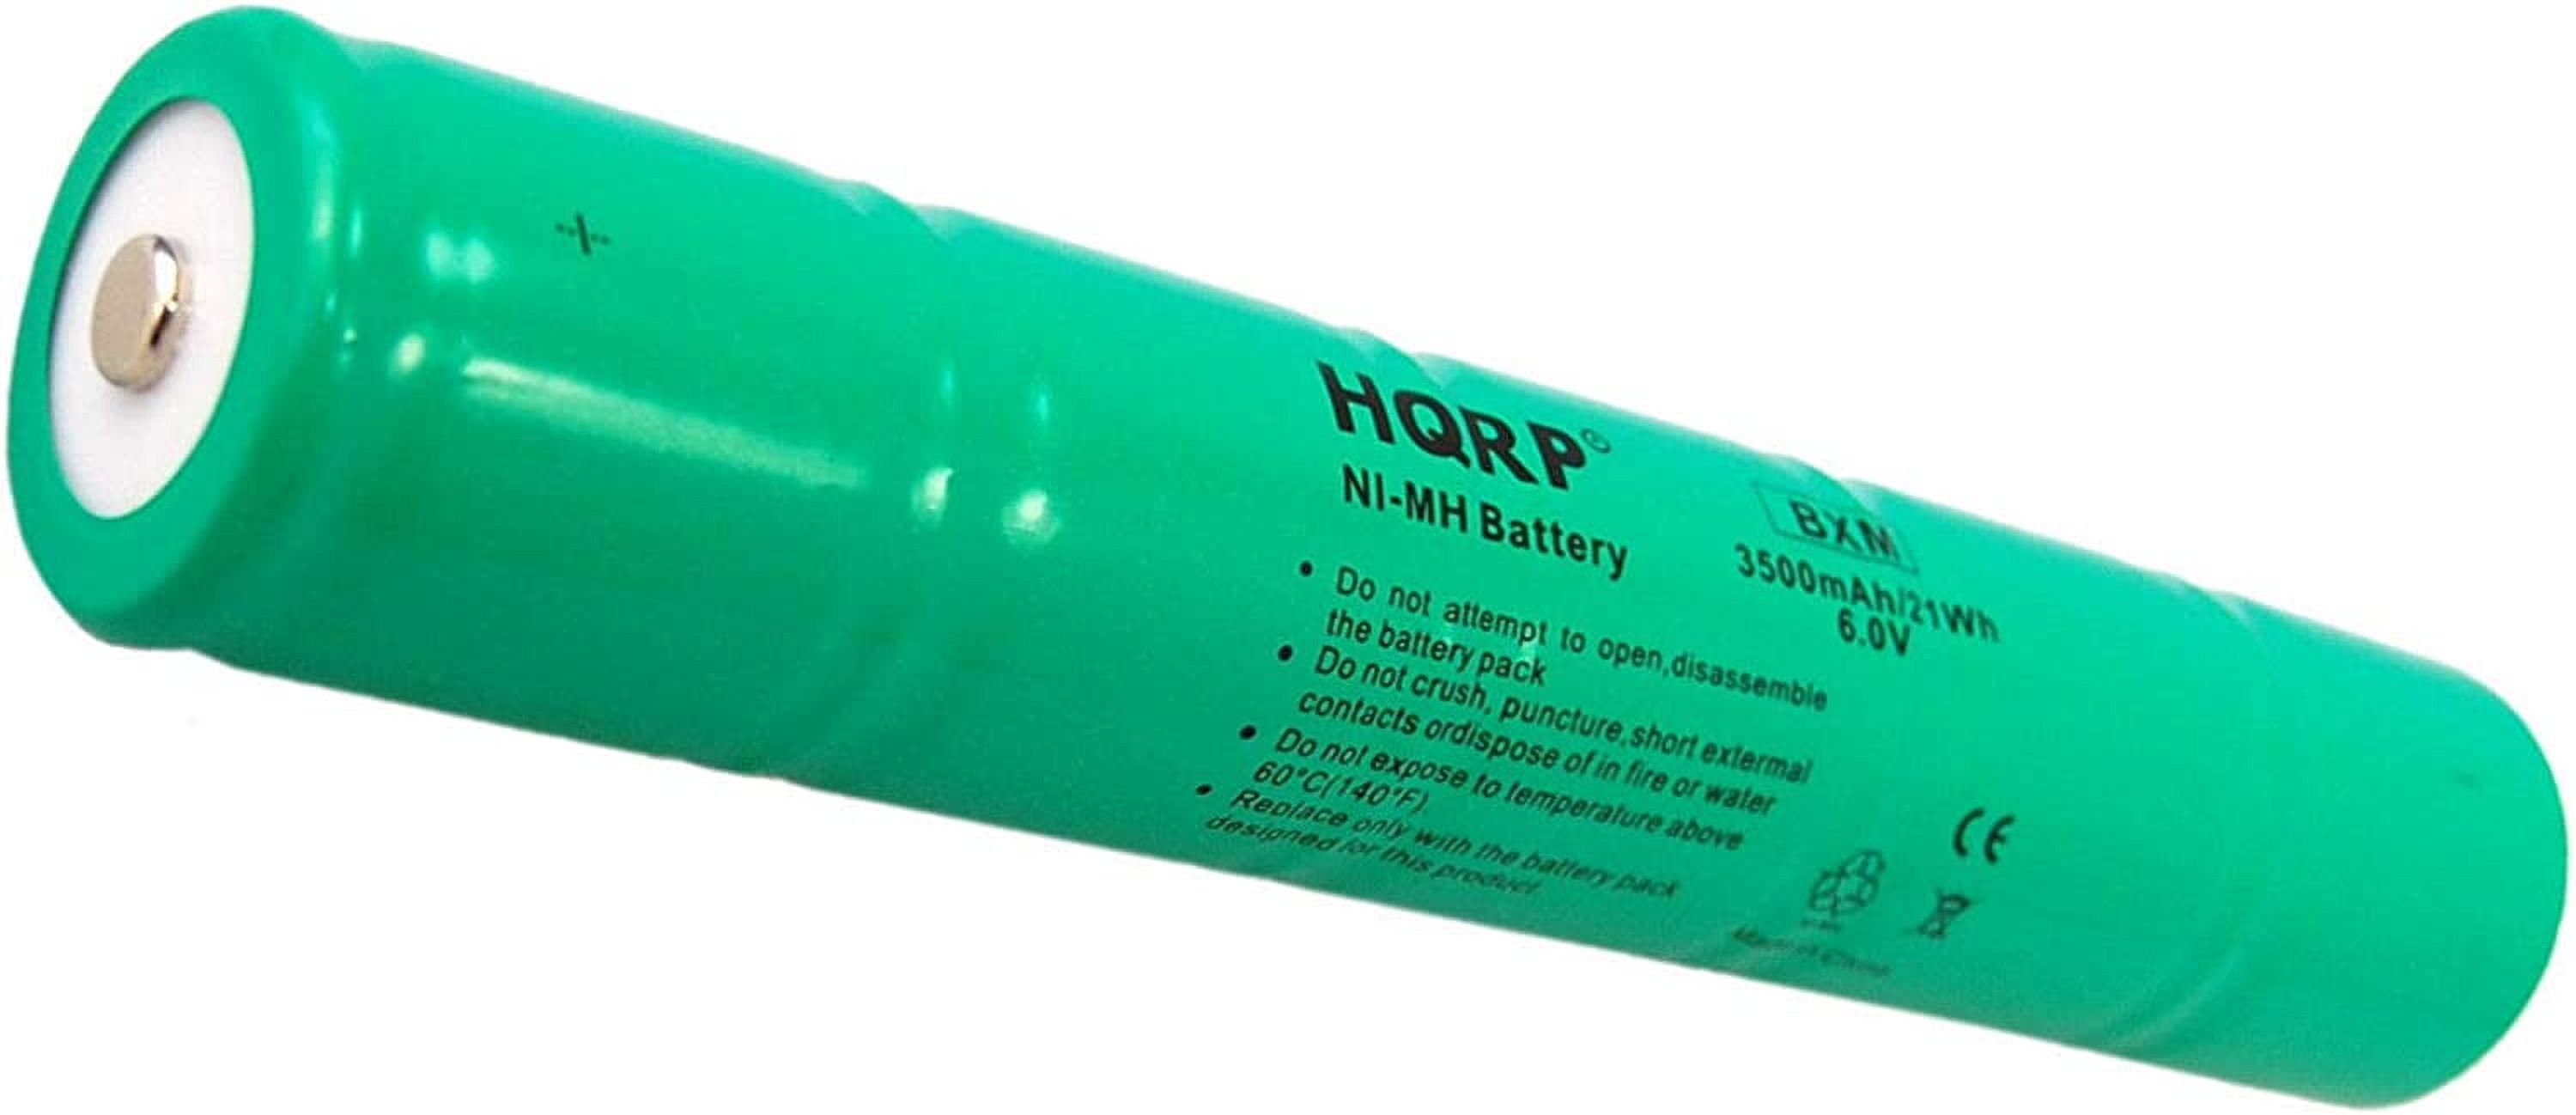 HQRP Ultra High Capacity Ni-Mh 1/2D Battery for Moltech Power Systems N38AF001A / Intec IMT-3500D / ESR8EE5920 - image 5 of 6